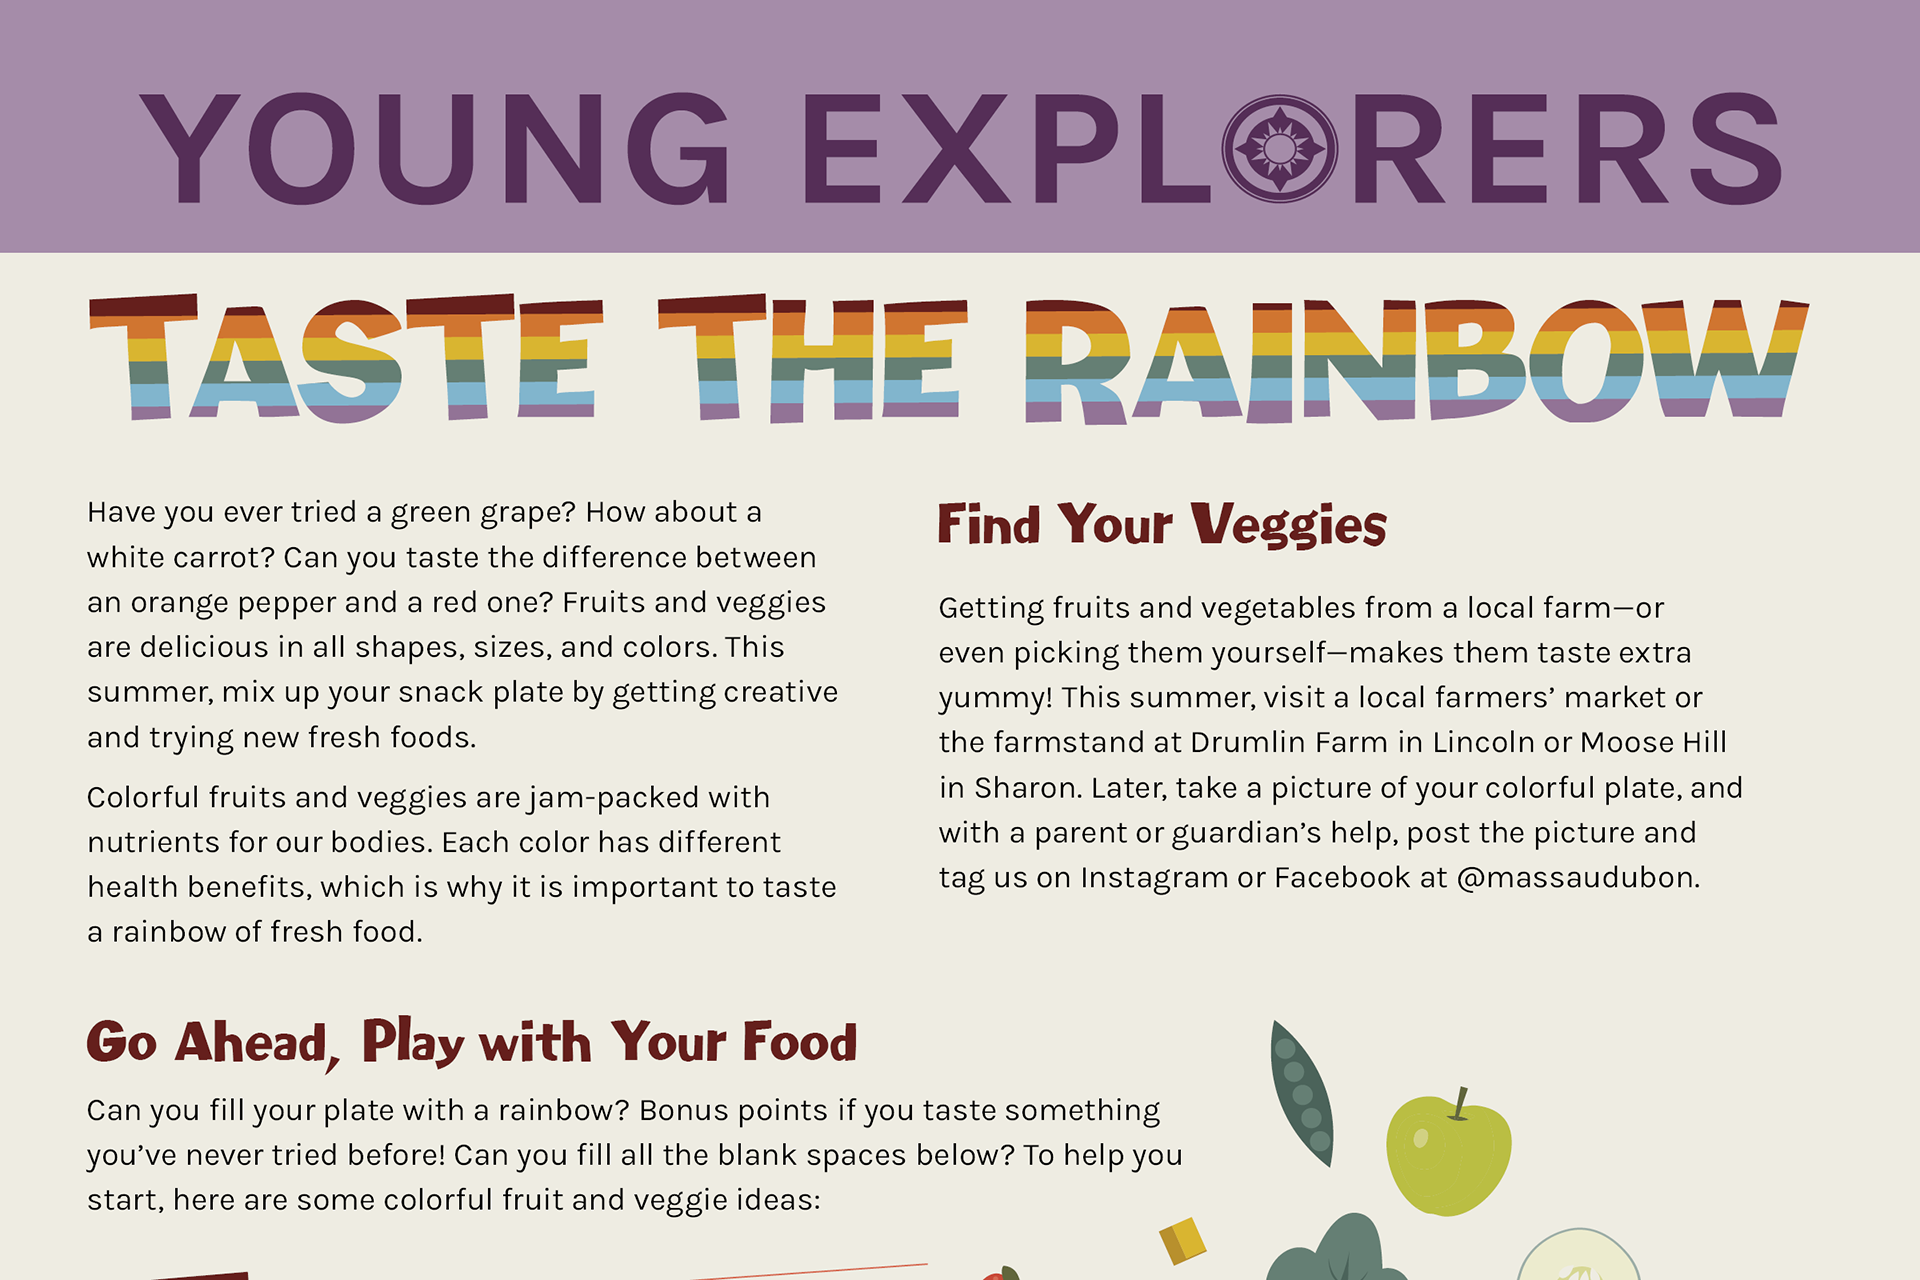 A screenshot of the "Young Explorers" activity page, Taste the Rainbow